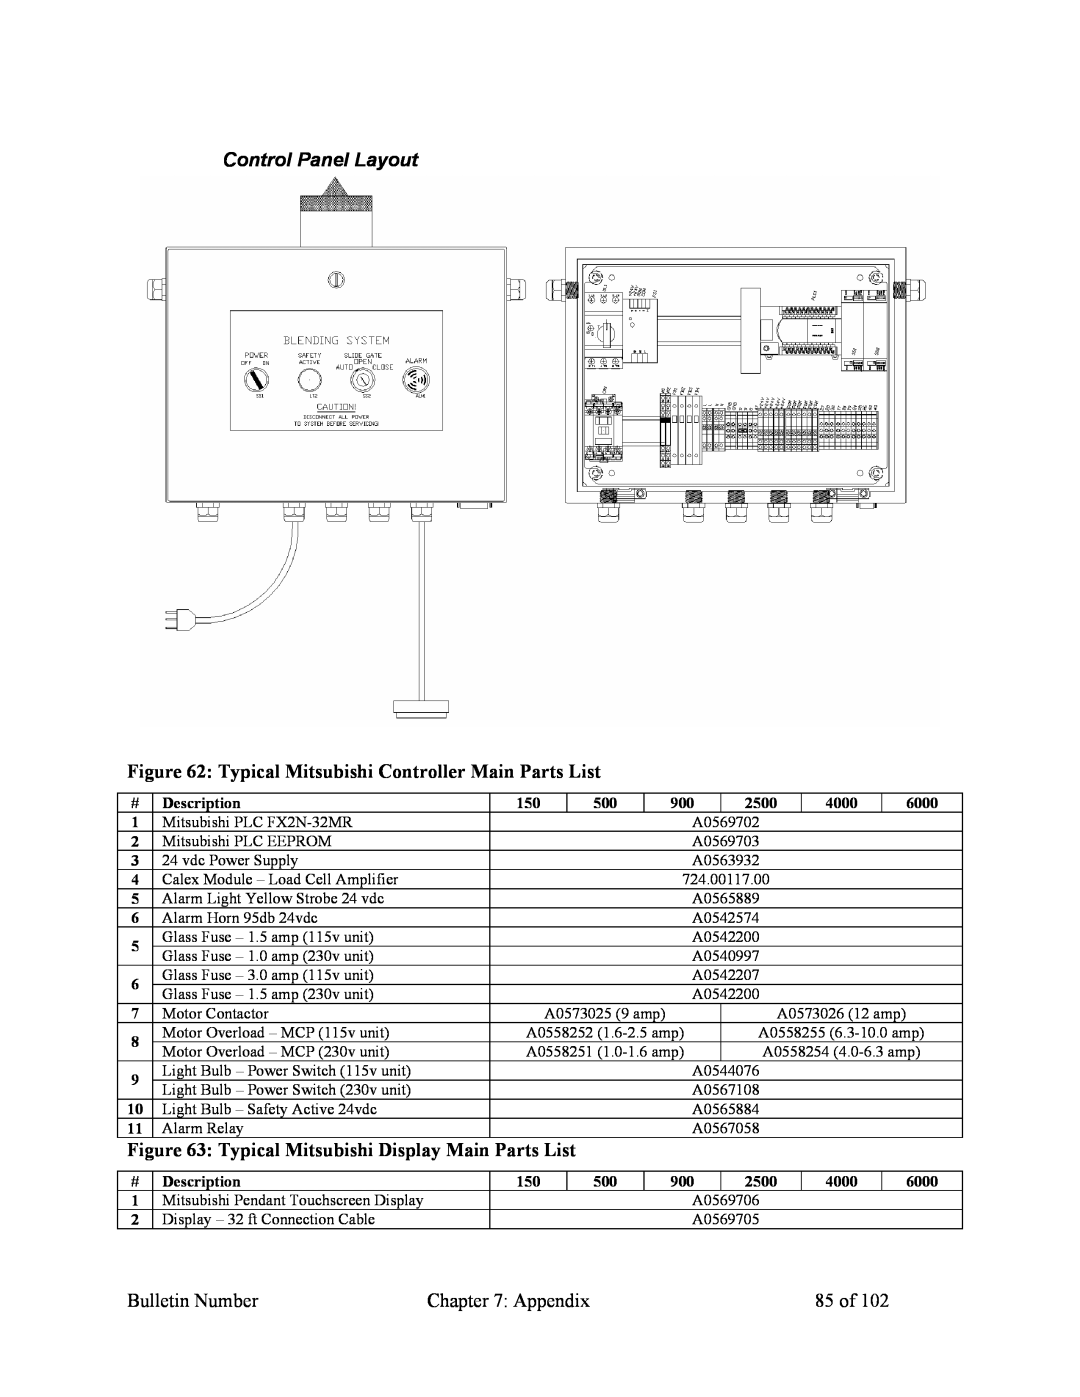 Mitsubishi Electronics 882.00207.00 specifications Control Panel Layout, Bulletin Number, Appendix, 85 of 